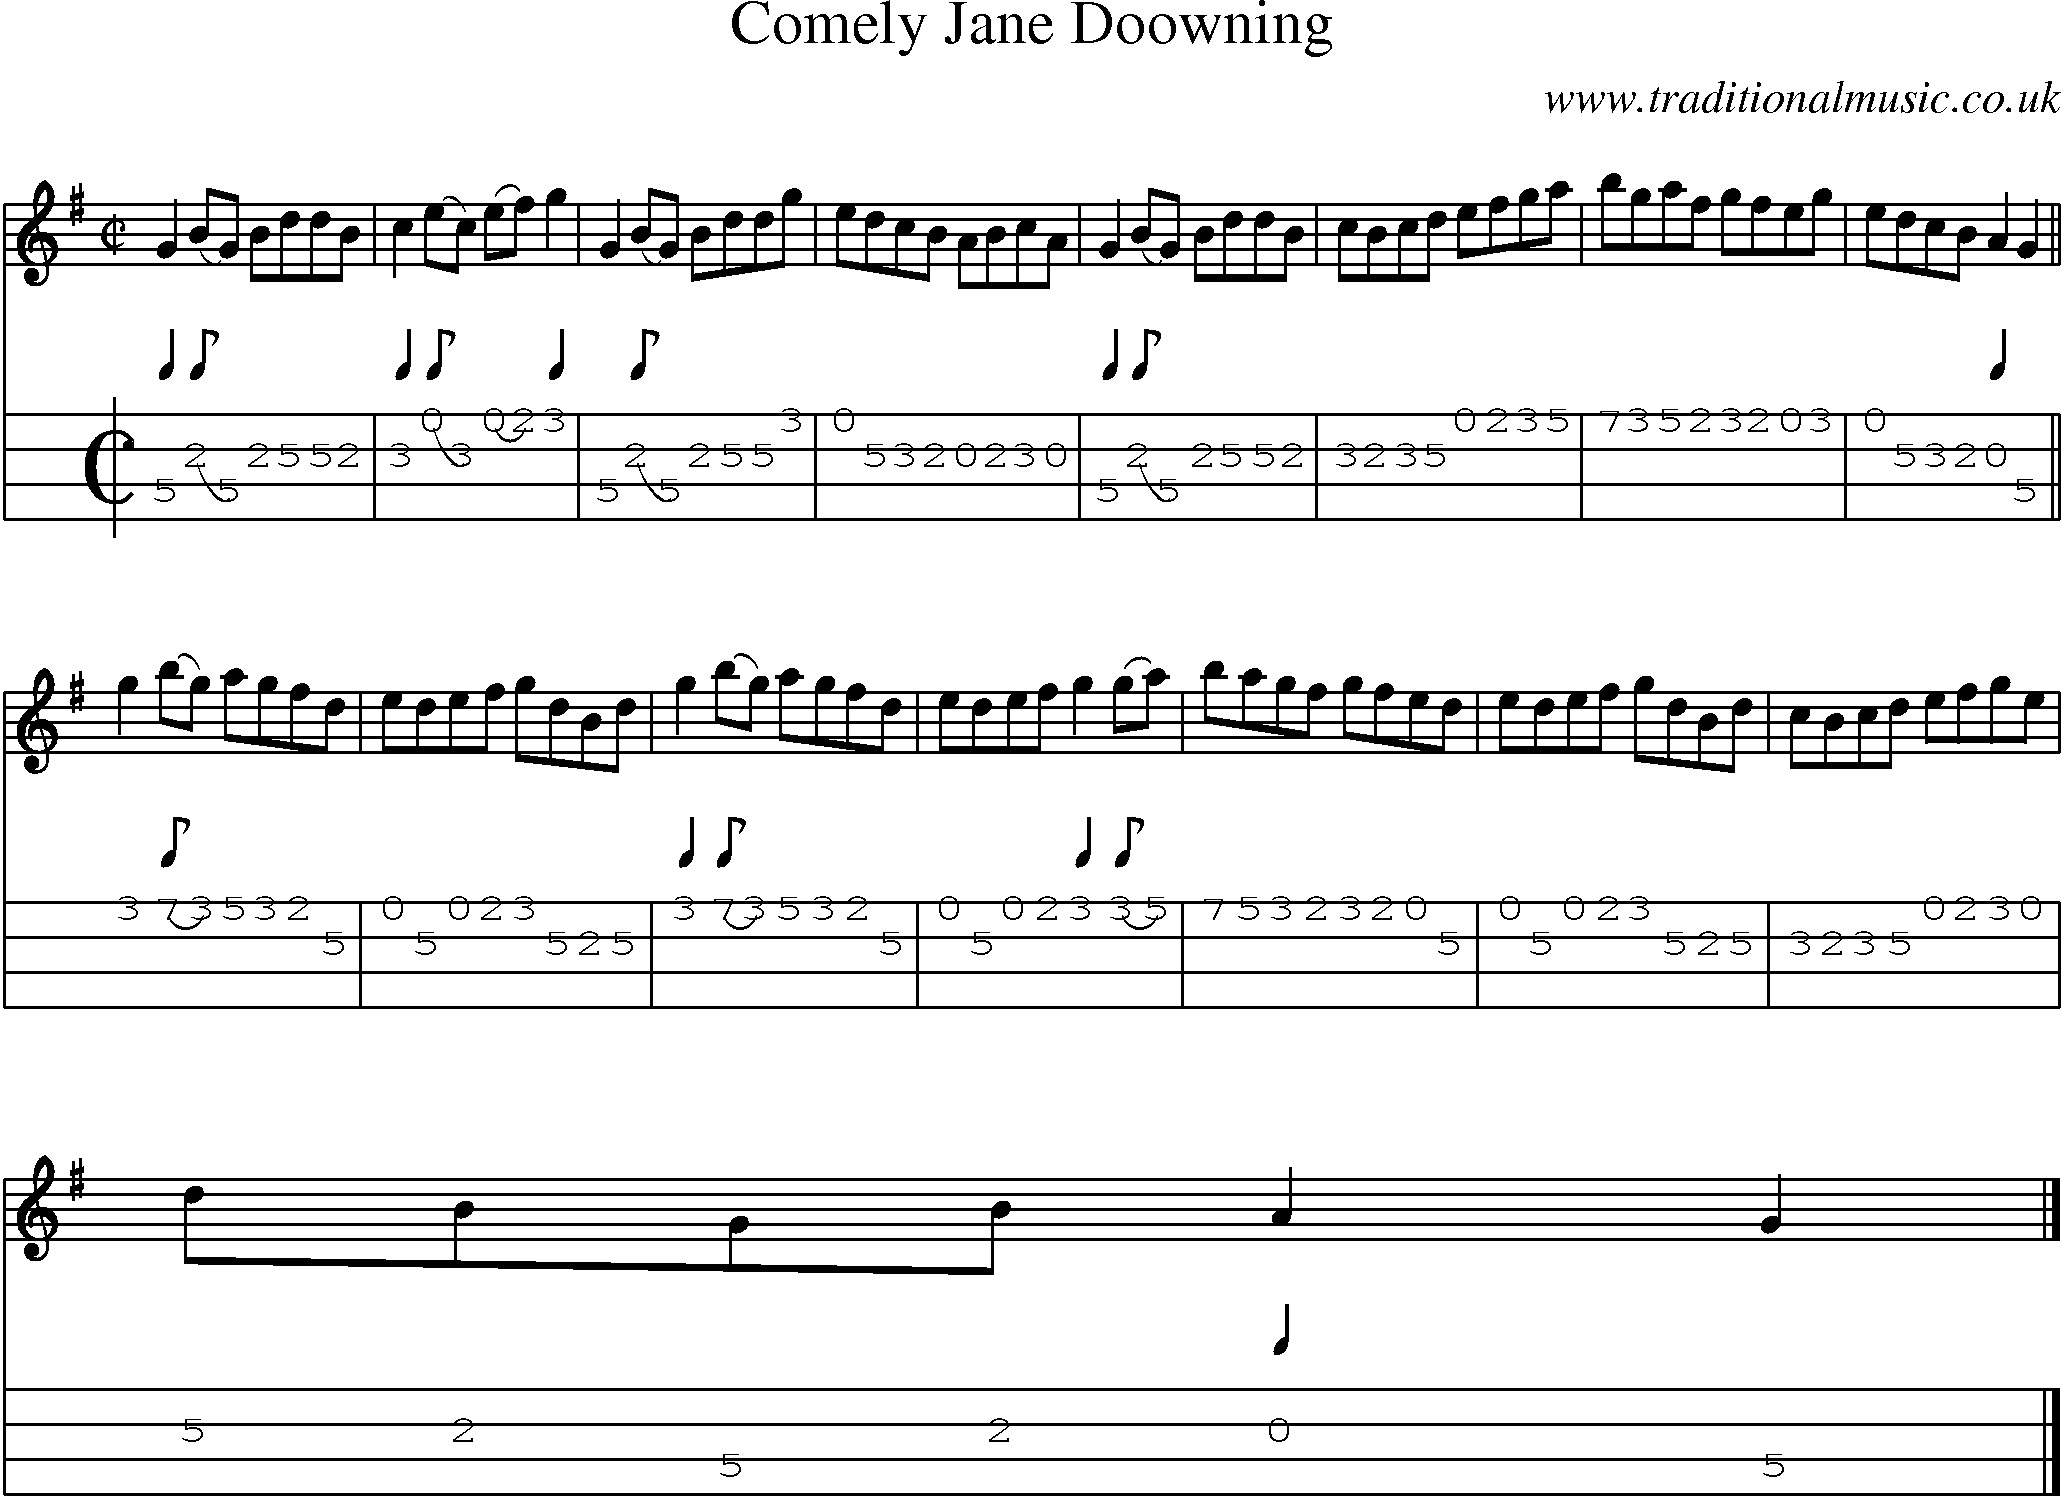 Music Score and Mandolin Tabs for Comely Jane Doowning